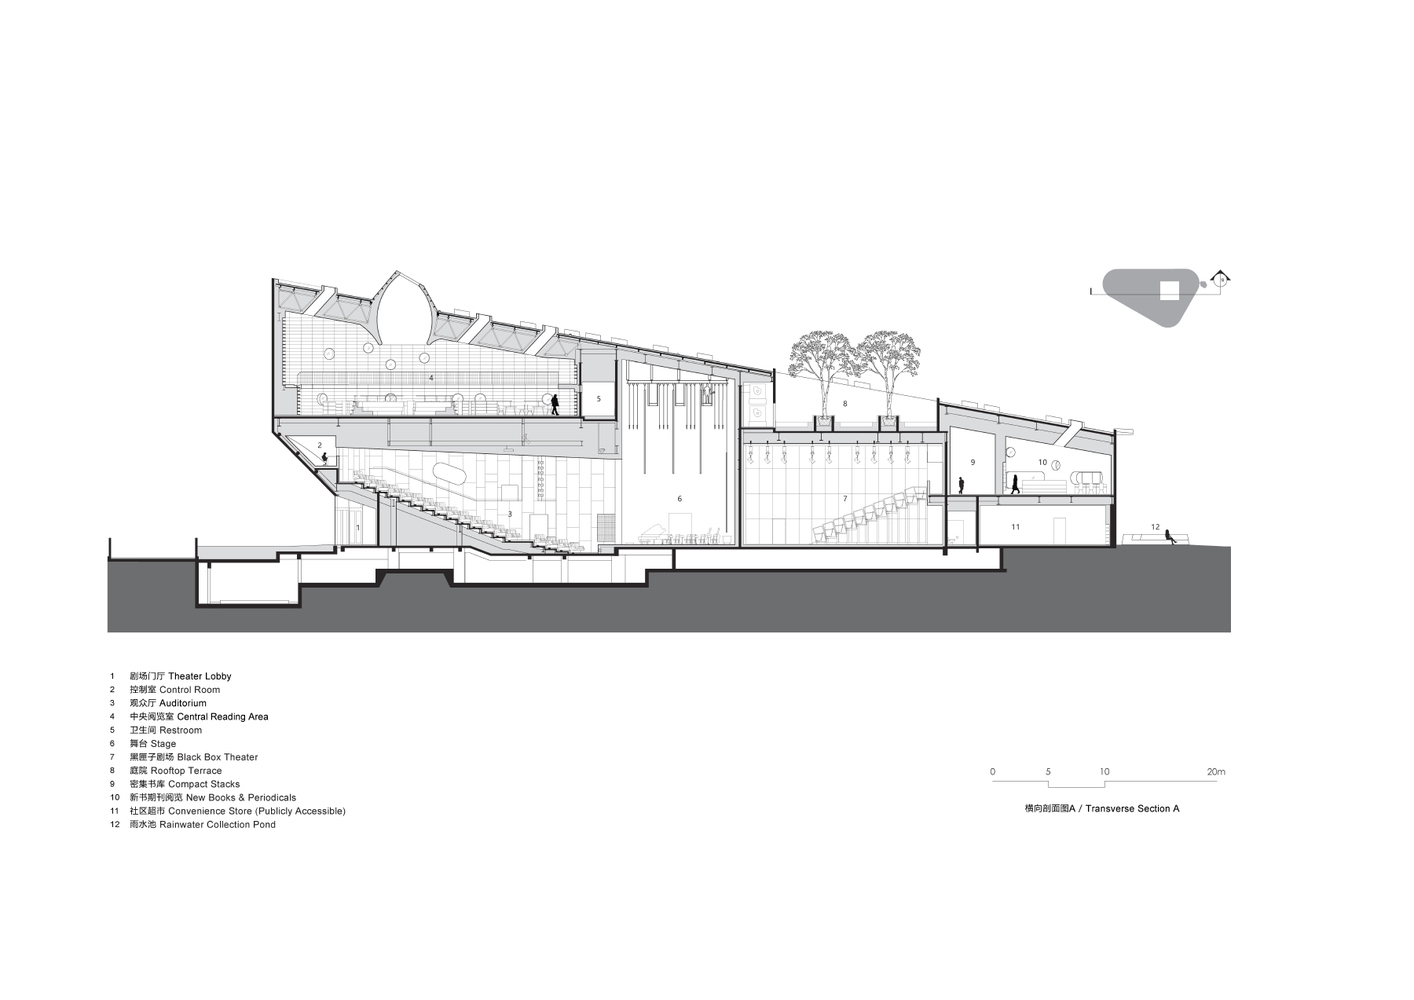 Bibliotheater_Section_A_OPEN_Architecture.jpg